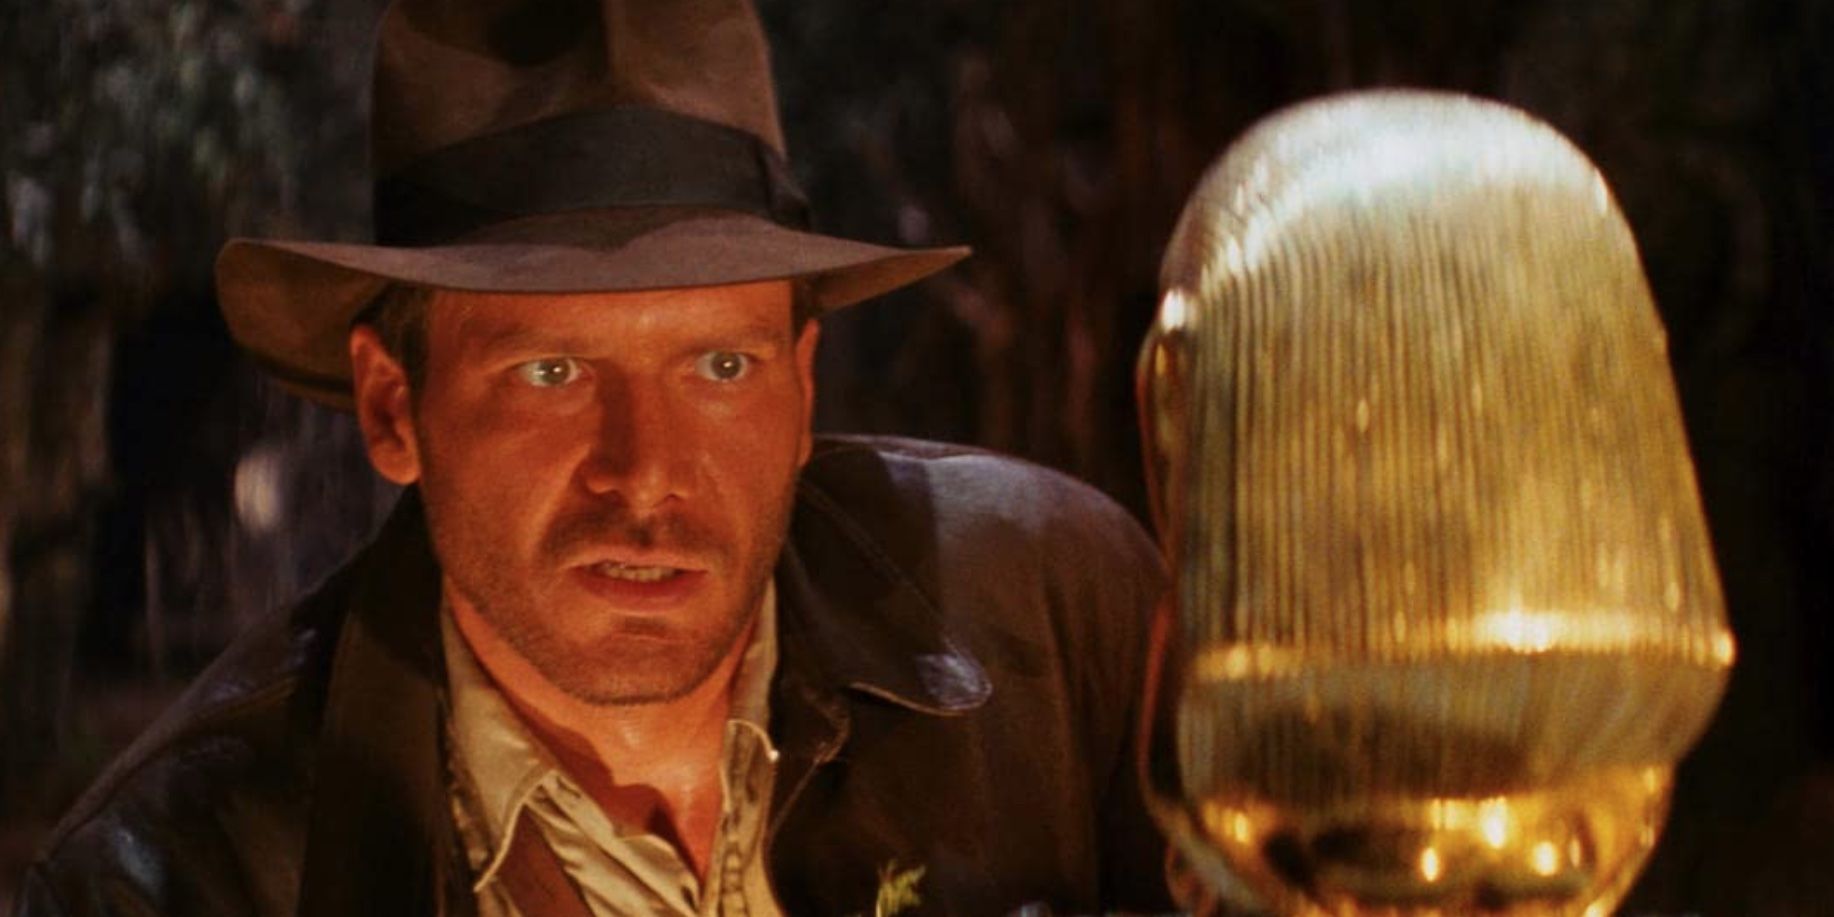 Harrison Ford in Indiana Jones: Raiders of the Lost Ark